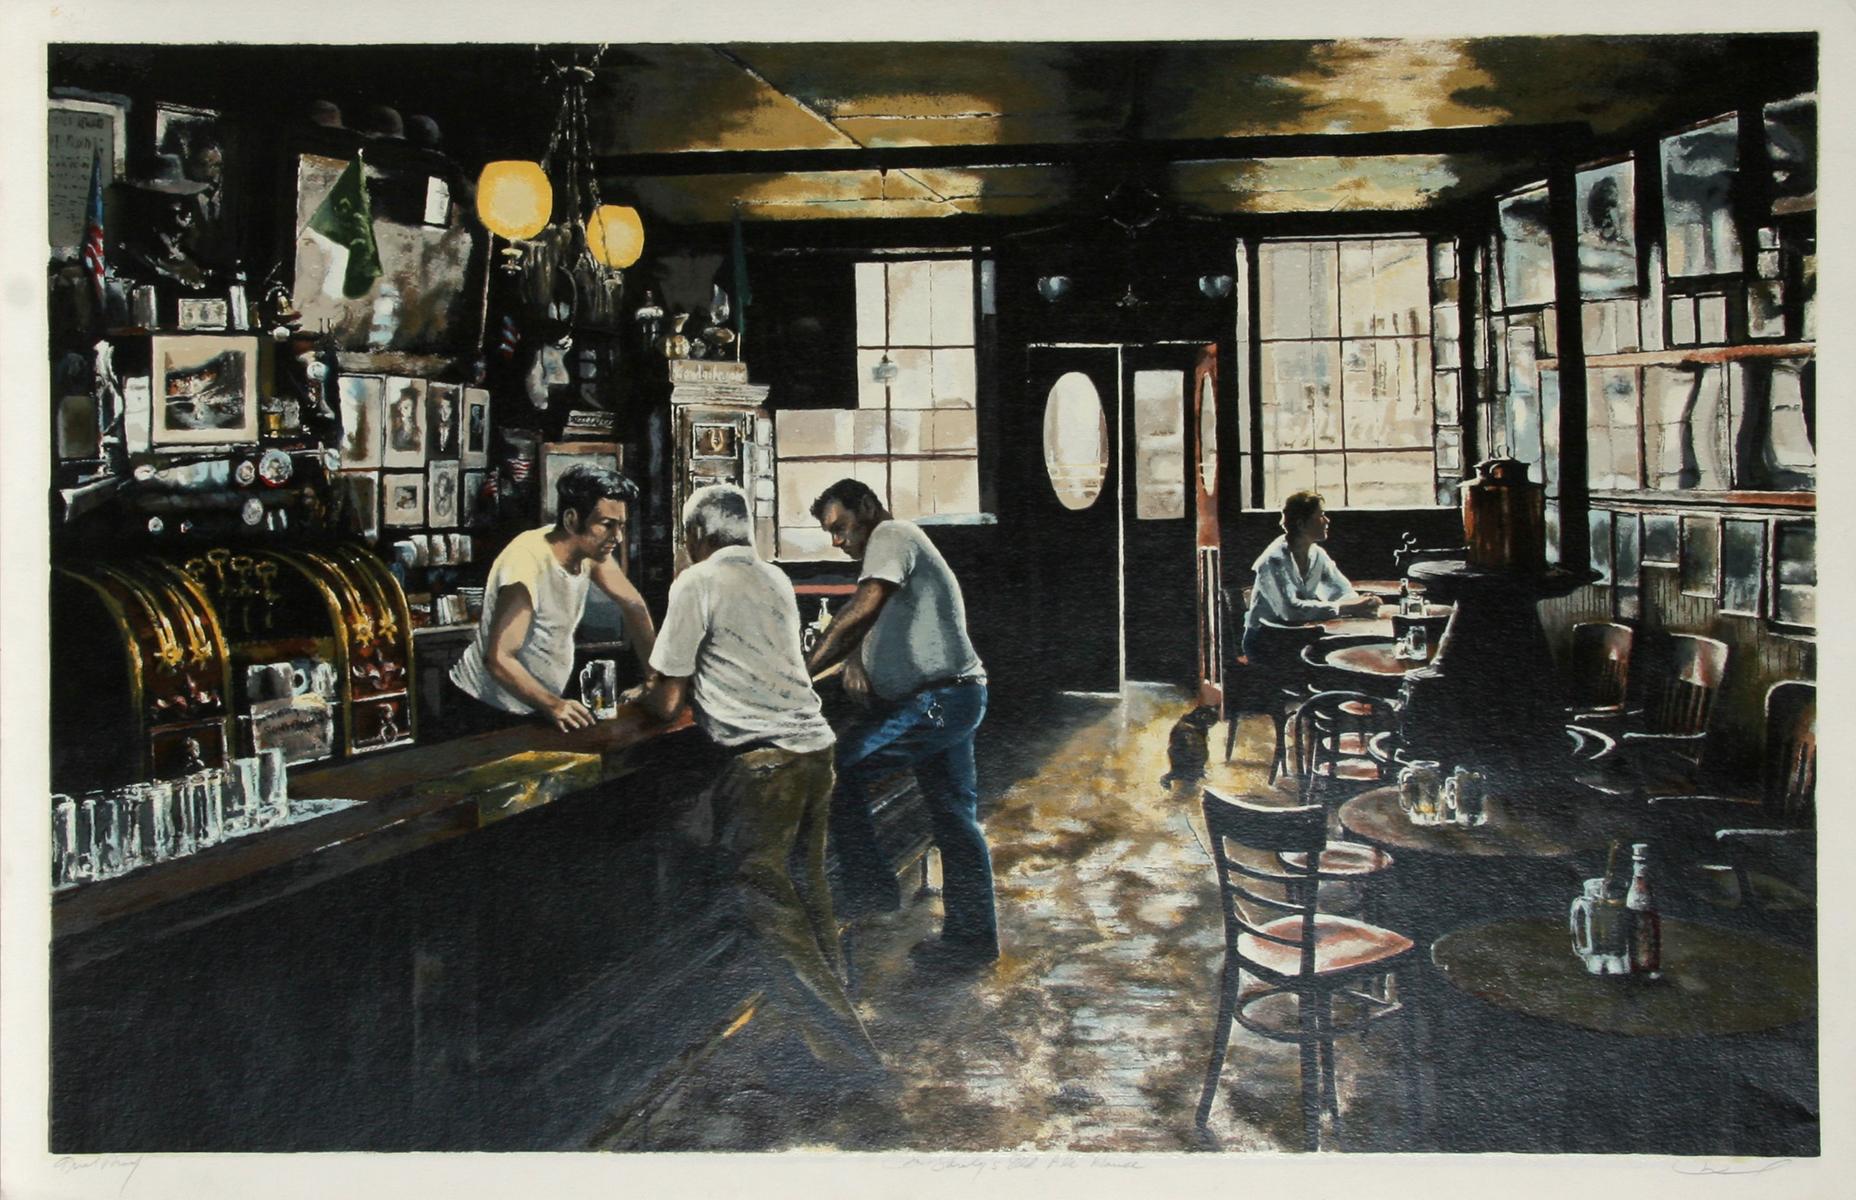 McSorely's Old Ale House, Screenprint by Harry McCormick